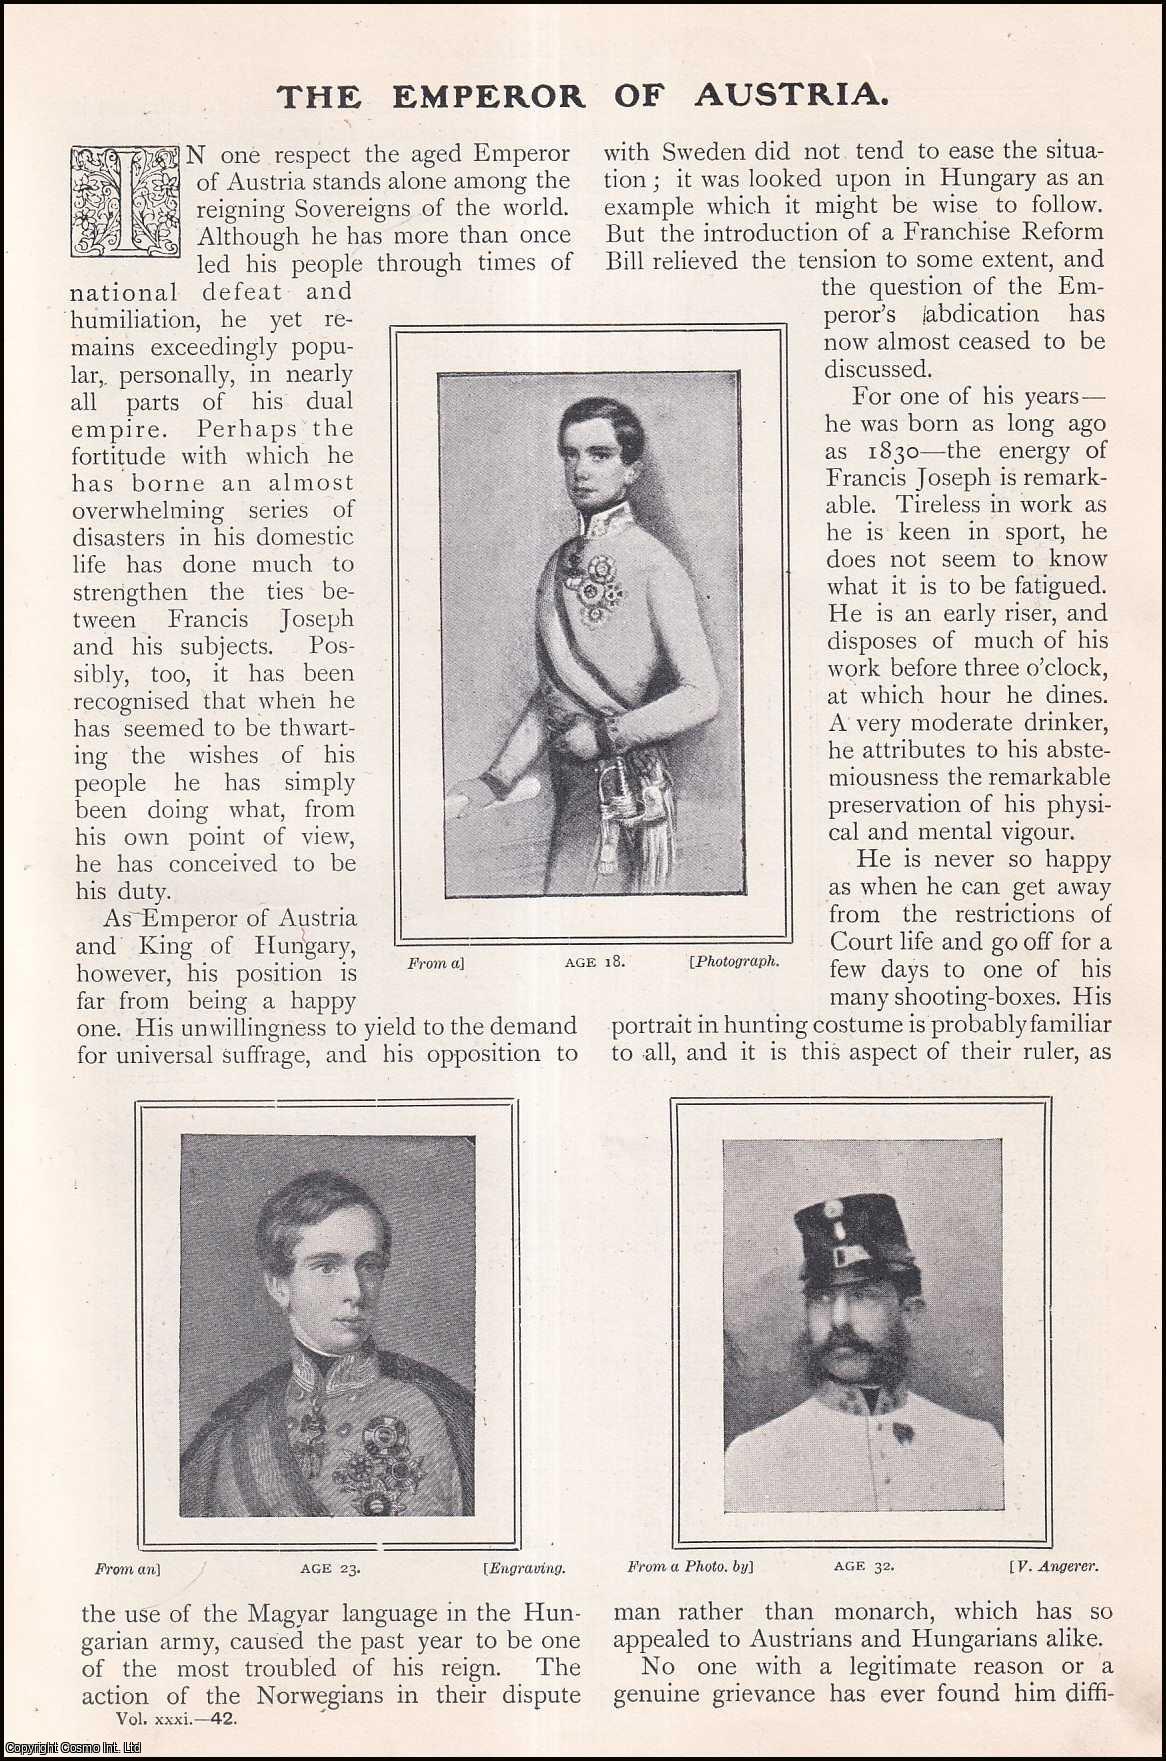 No Author Stated - The Emperor of Austria. Portraits of Celebrities at Different Ages. An uncommon original article from The Strand Magazine, 1906.